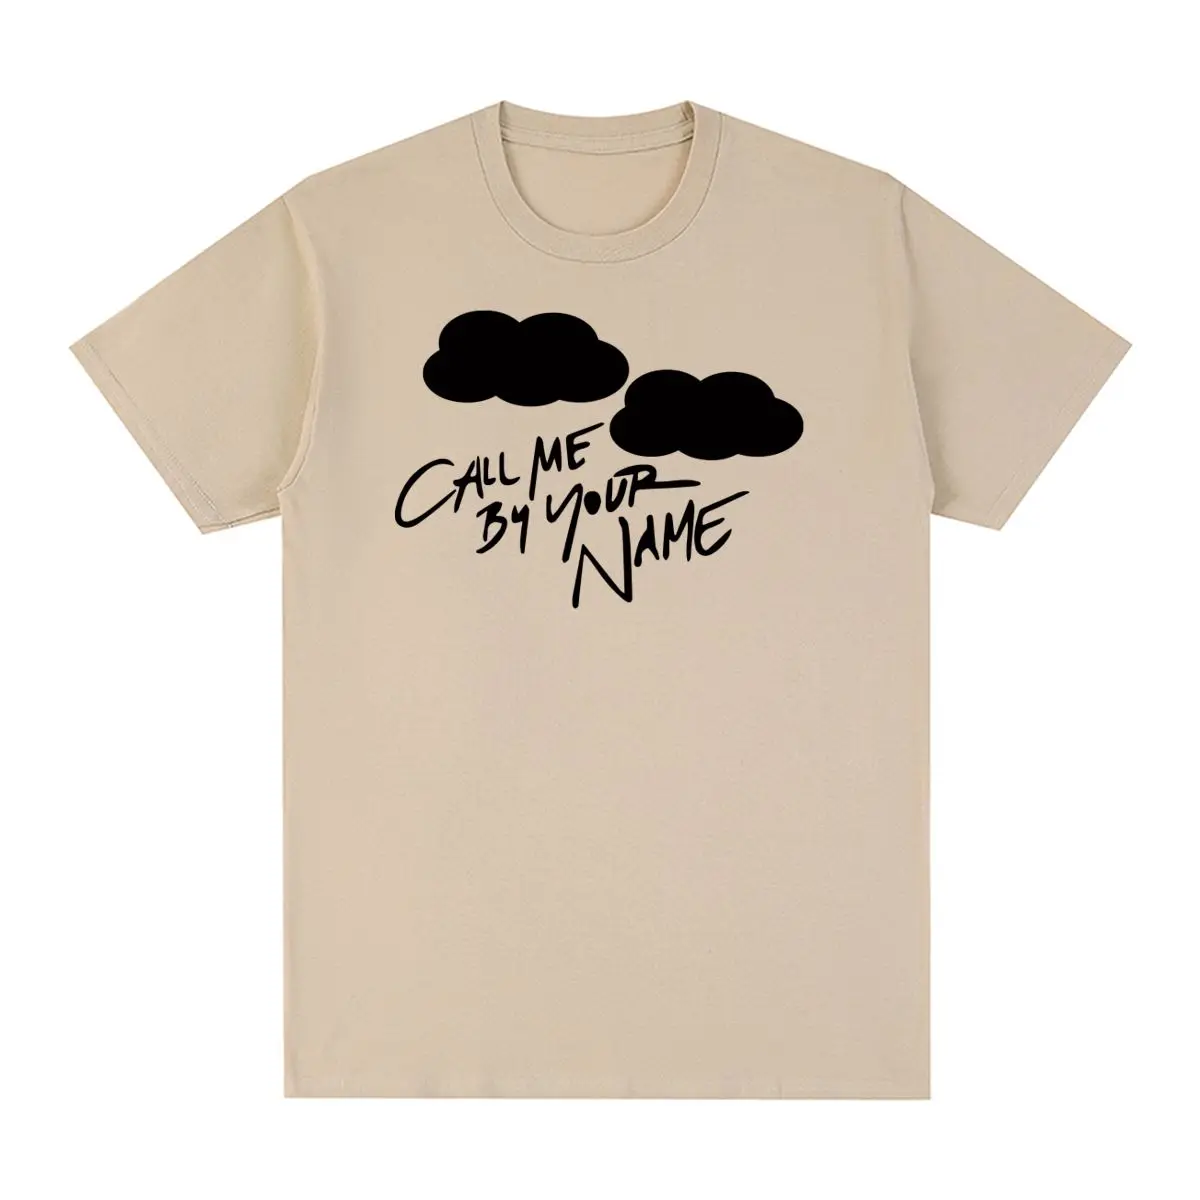 Call Me By Your Name Vintage T-shirt Timothee Chalamet CMBYN Elio Oliver Sweet Love Cotton Men T shirt New Tee Tshirt Women Tops